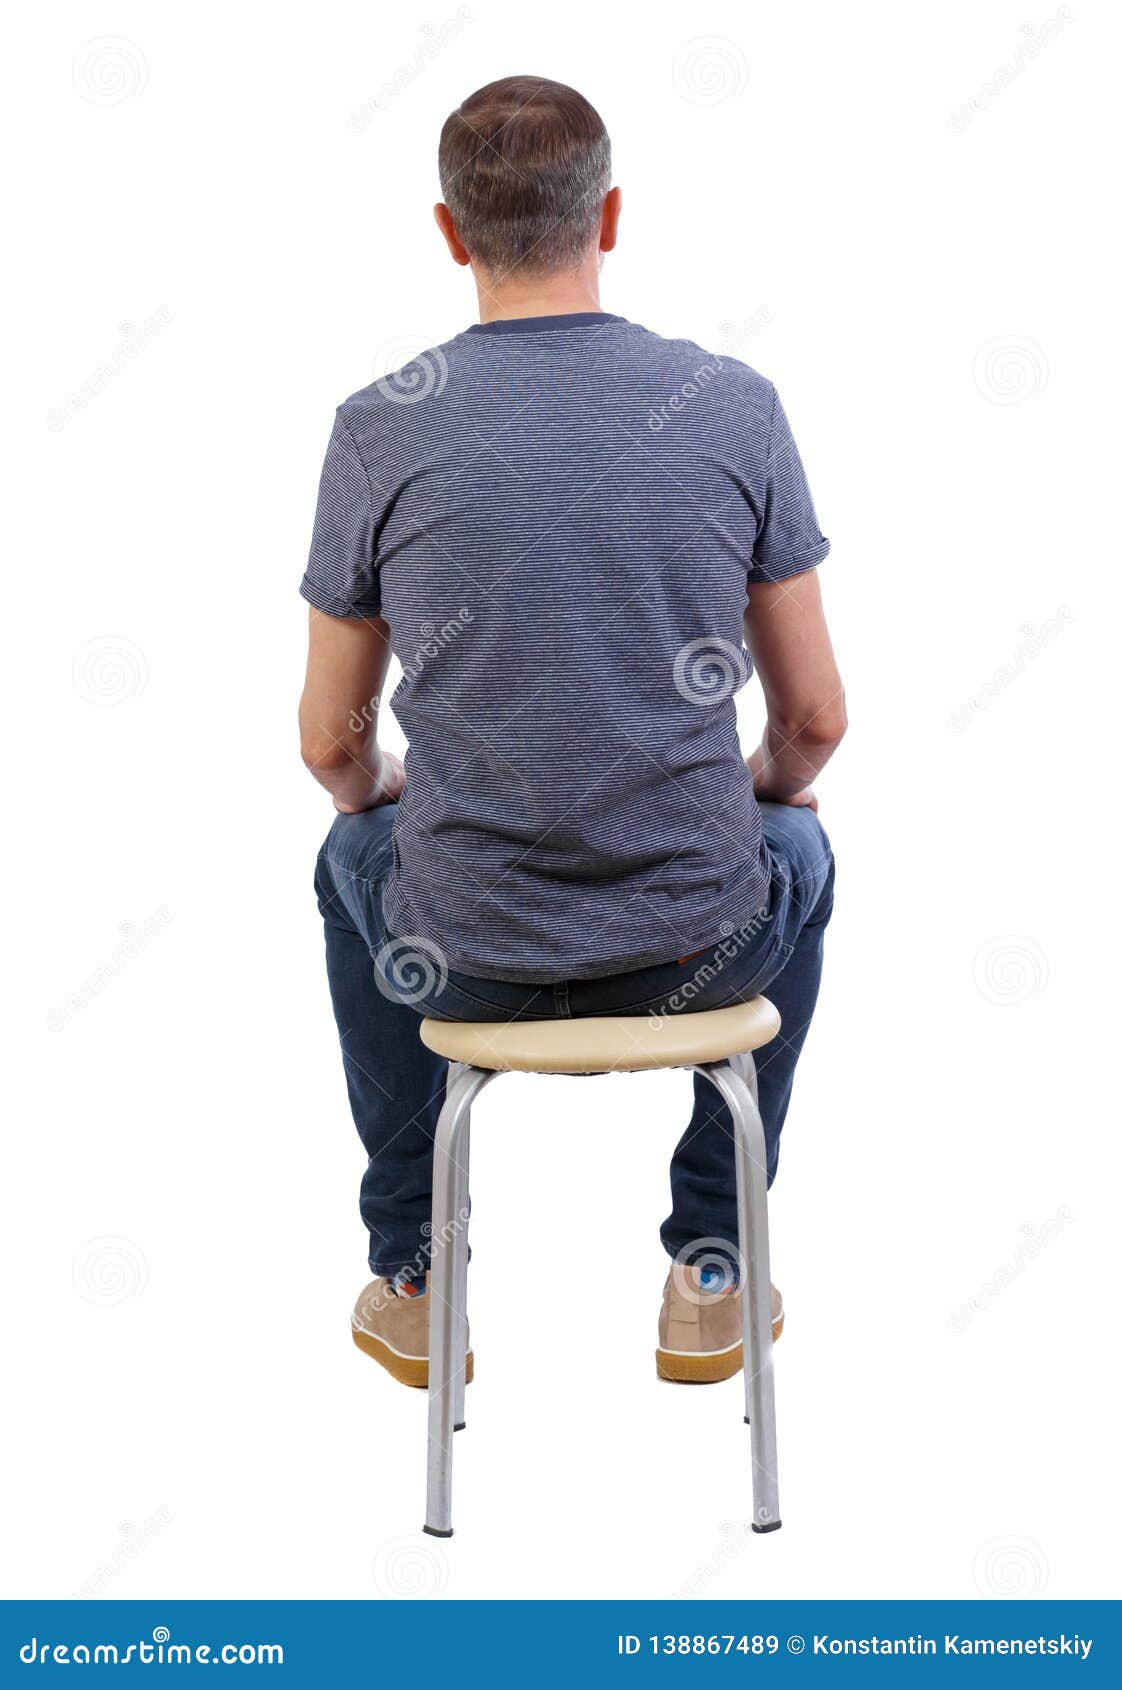 Back View Of A Man Sitting On A Chair Stock Image Image Of Education Cellar 138867489 